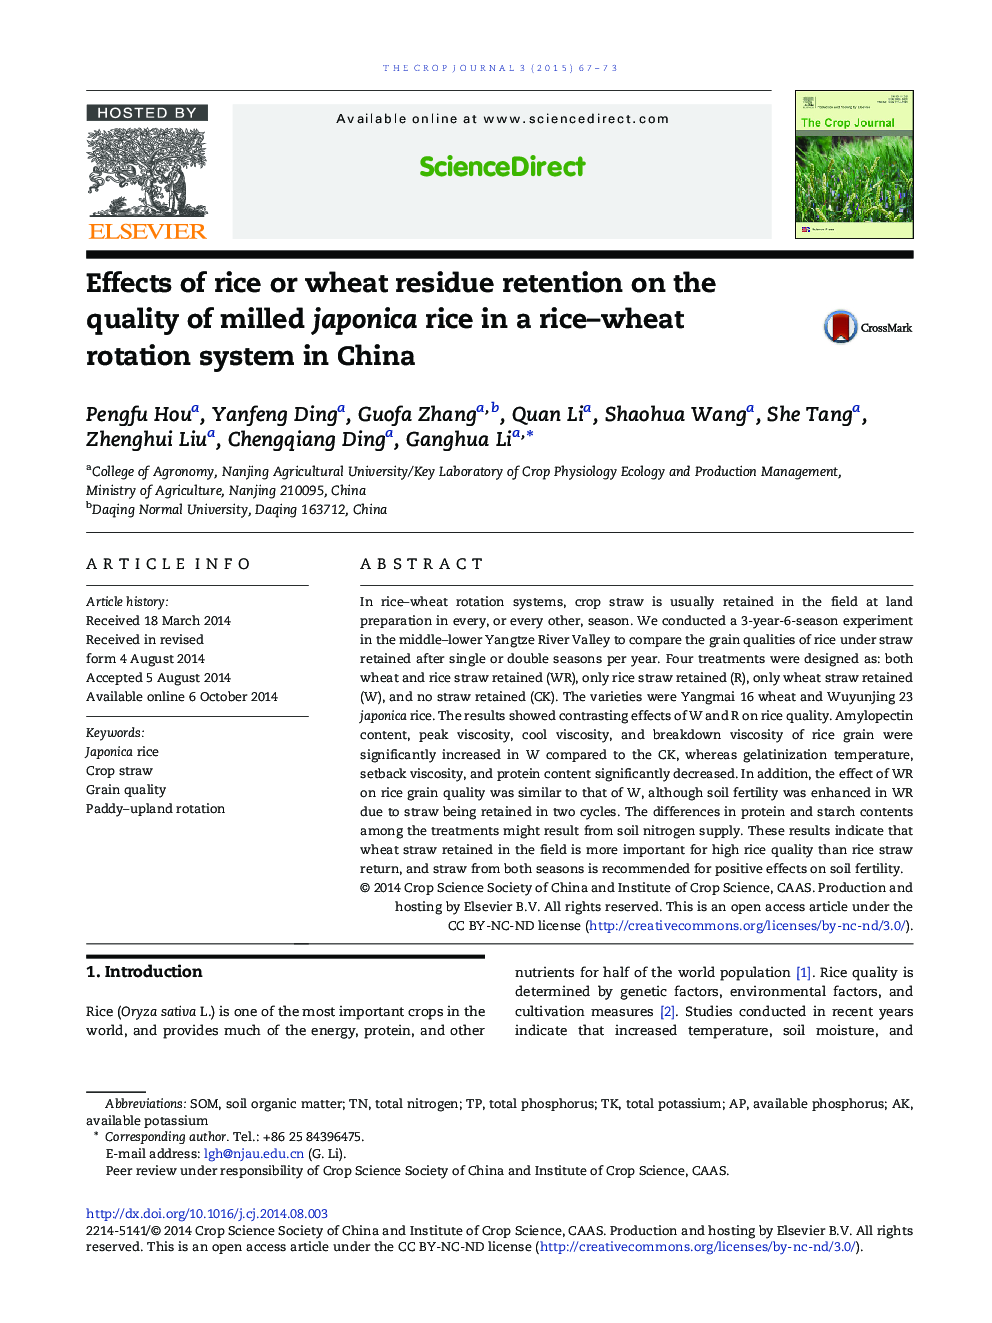 Effects of rice or wheat residue retention on the quality of milled japonica rice in a rice–wheat rotation system in China